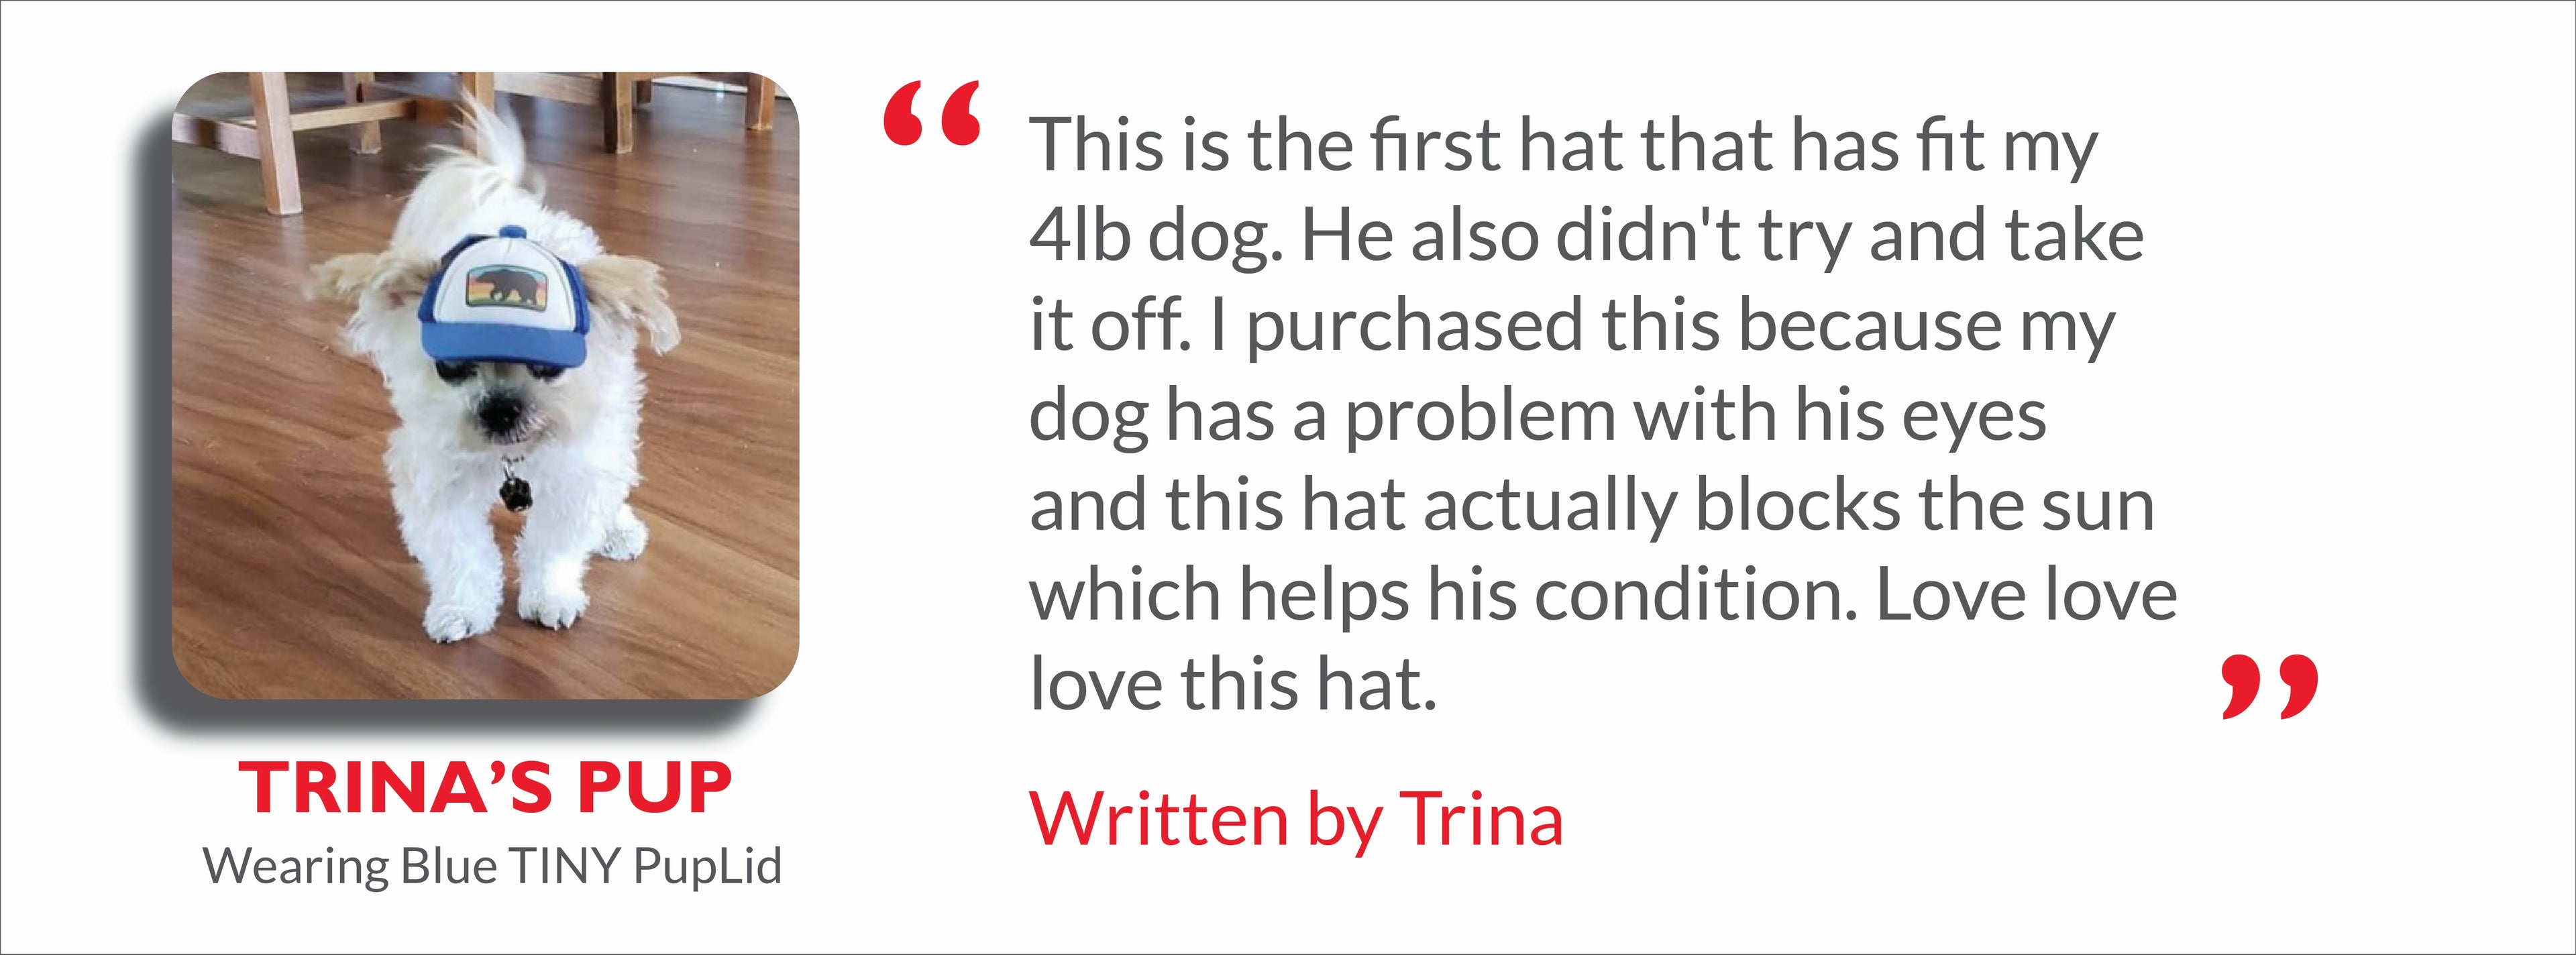 Customer review telling us she loves PupLid Tiny dog hats for helping her dog's sensitive eyes.